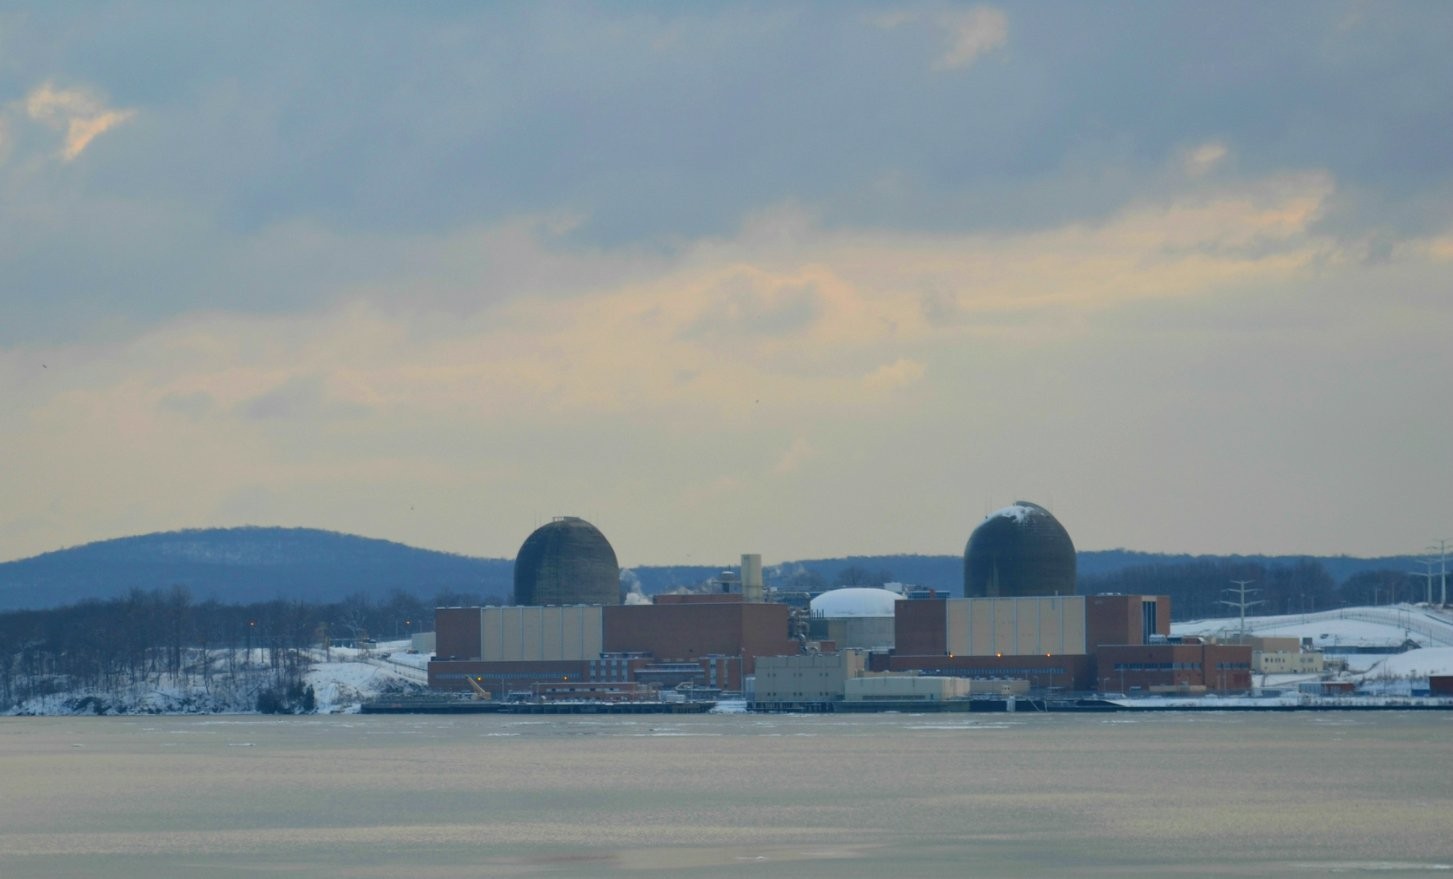  Entergy's Indian Point Unit 3 nuclear power plant returned to service yesterday.